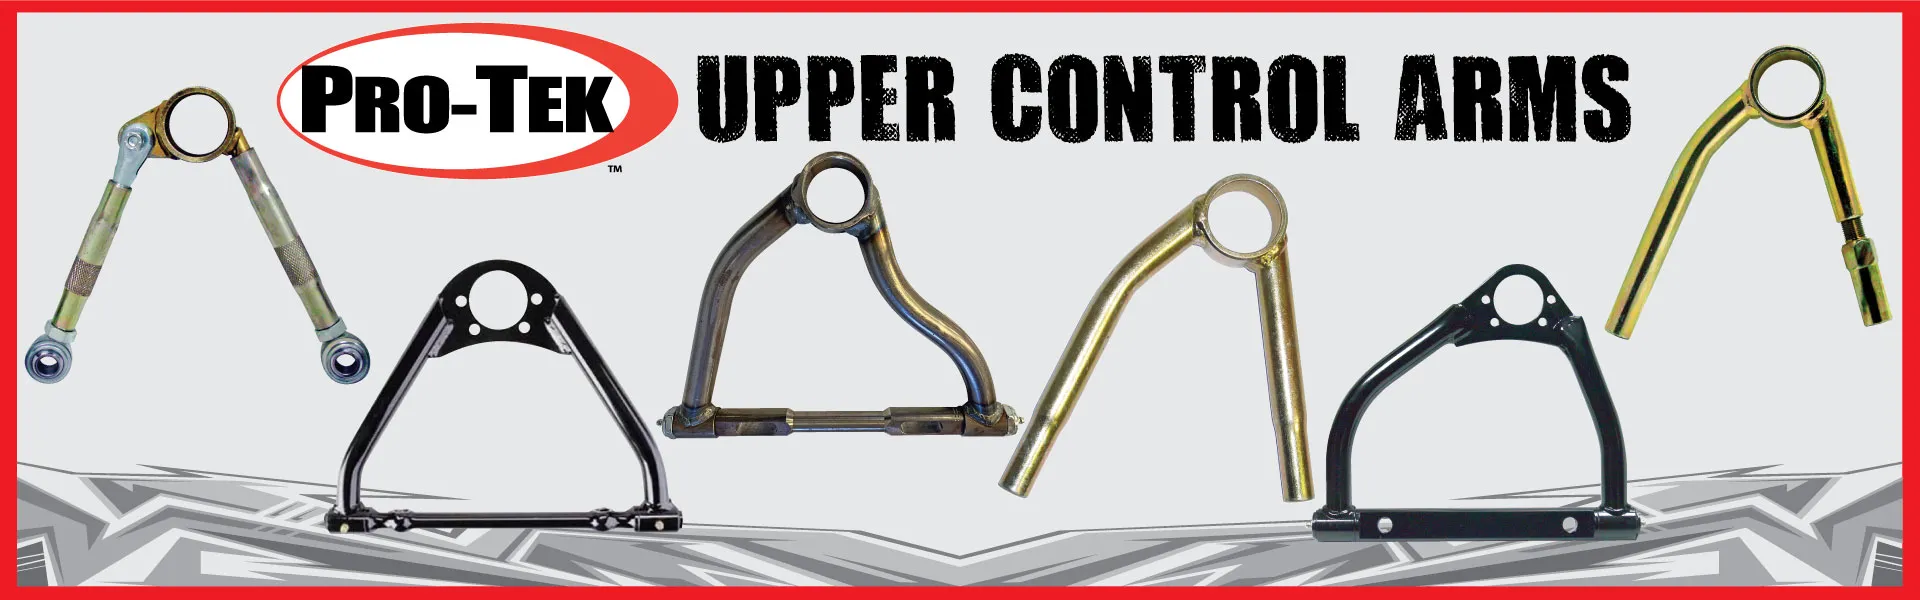 Pro-Tek Upper Control Arms for GM Metric, Camaro, and more available at Day Motor Sports.